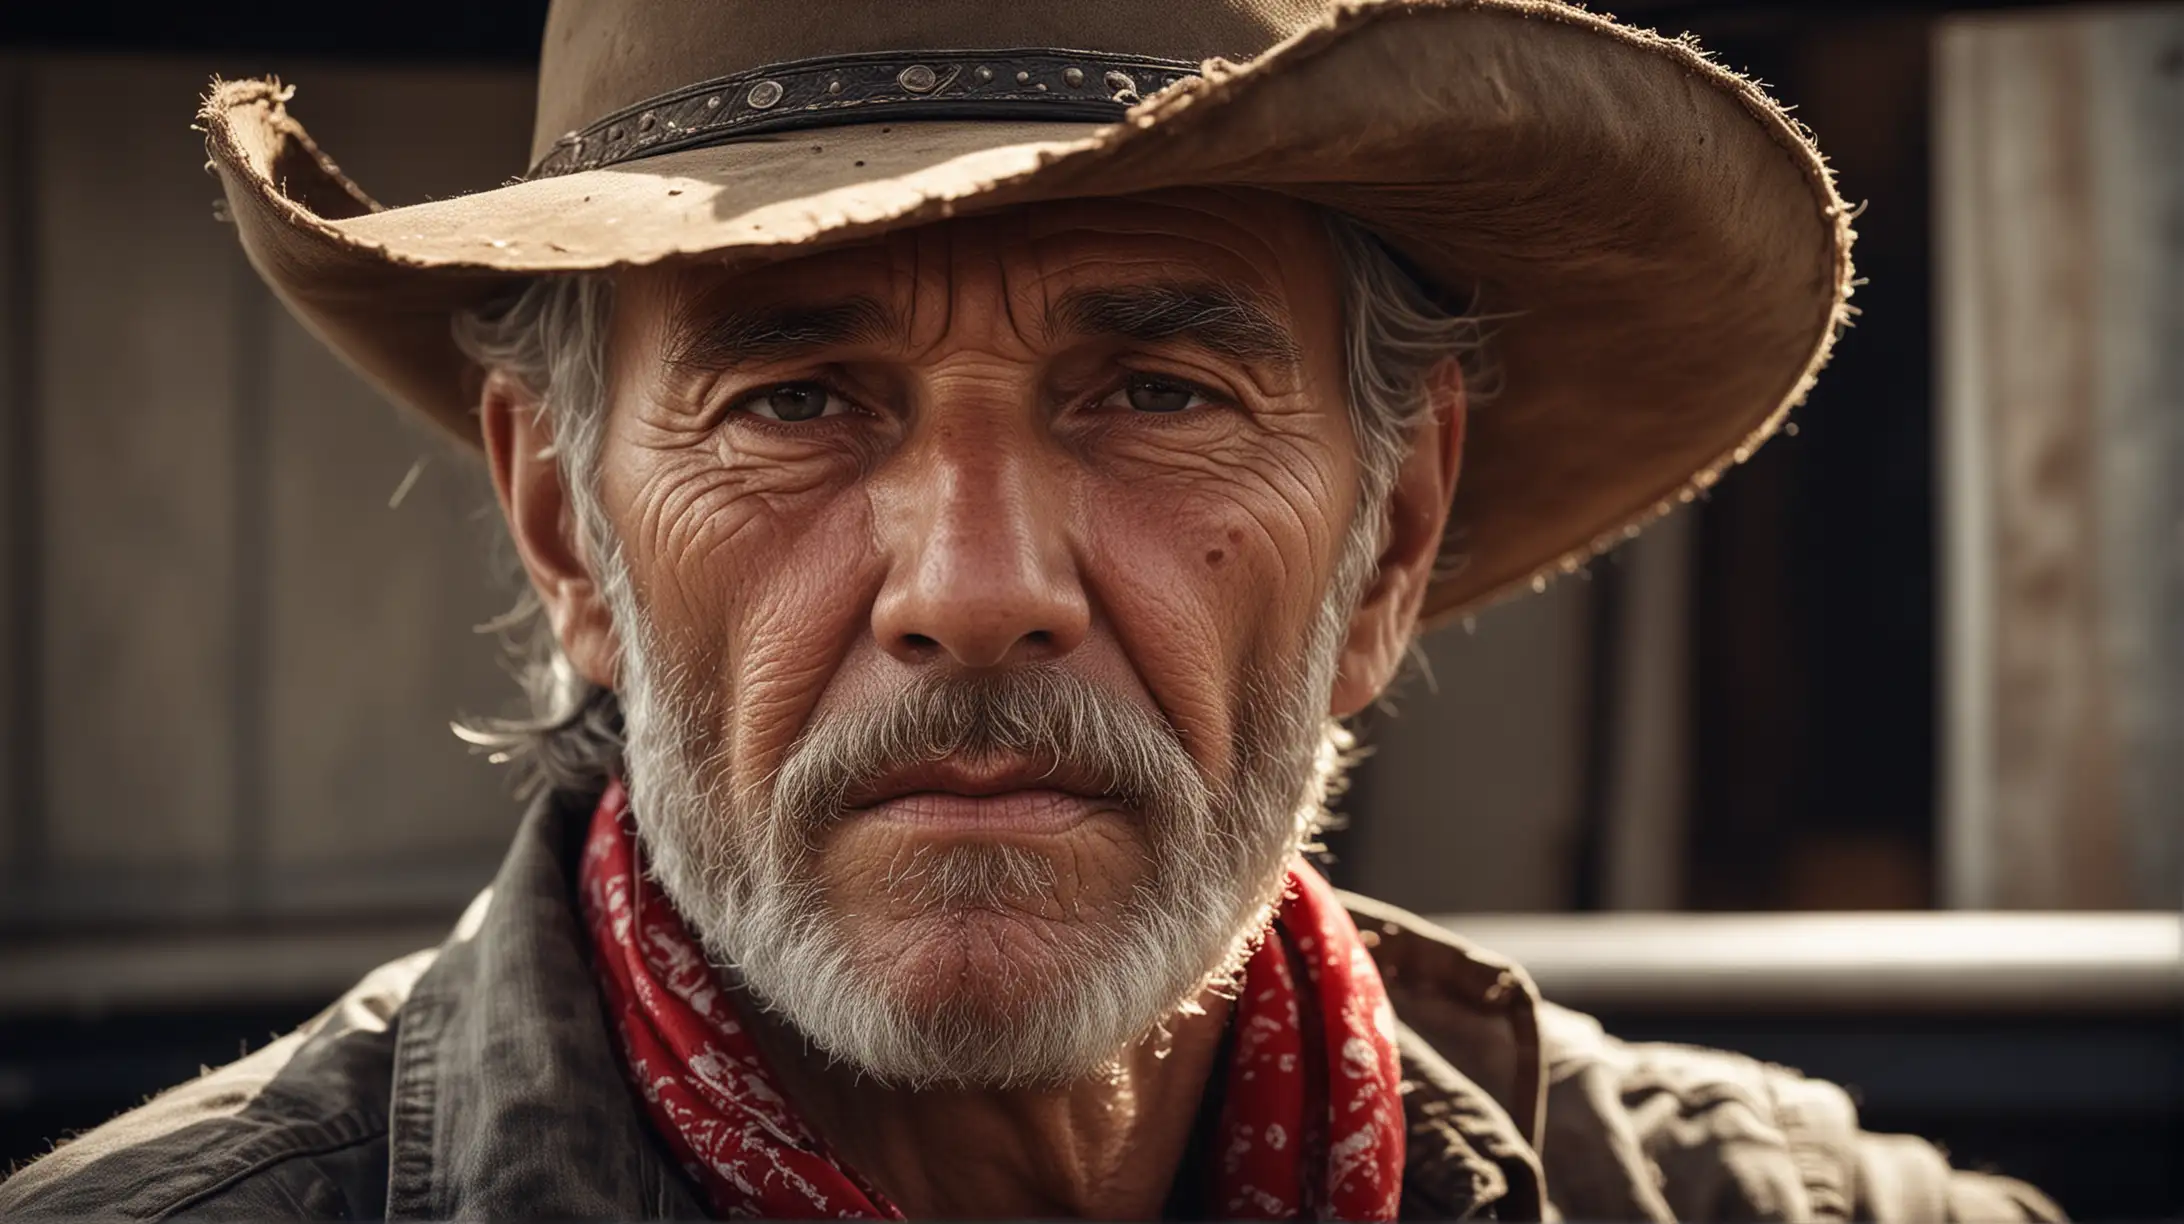 CLASSIC CLOSE UP PORTRAIT PHOTOGRAPHY STYLE, ageing truck driver, stubble, tattered cowboy hat, red bandana around neck, photo realistic, cinematic lighting, 